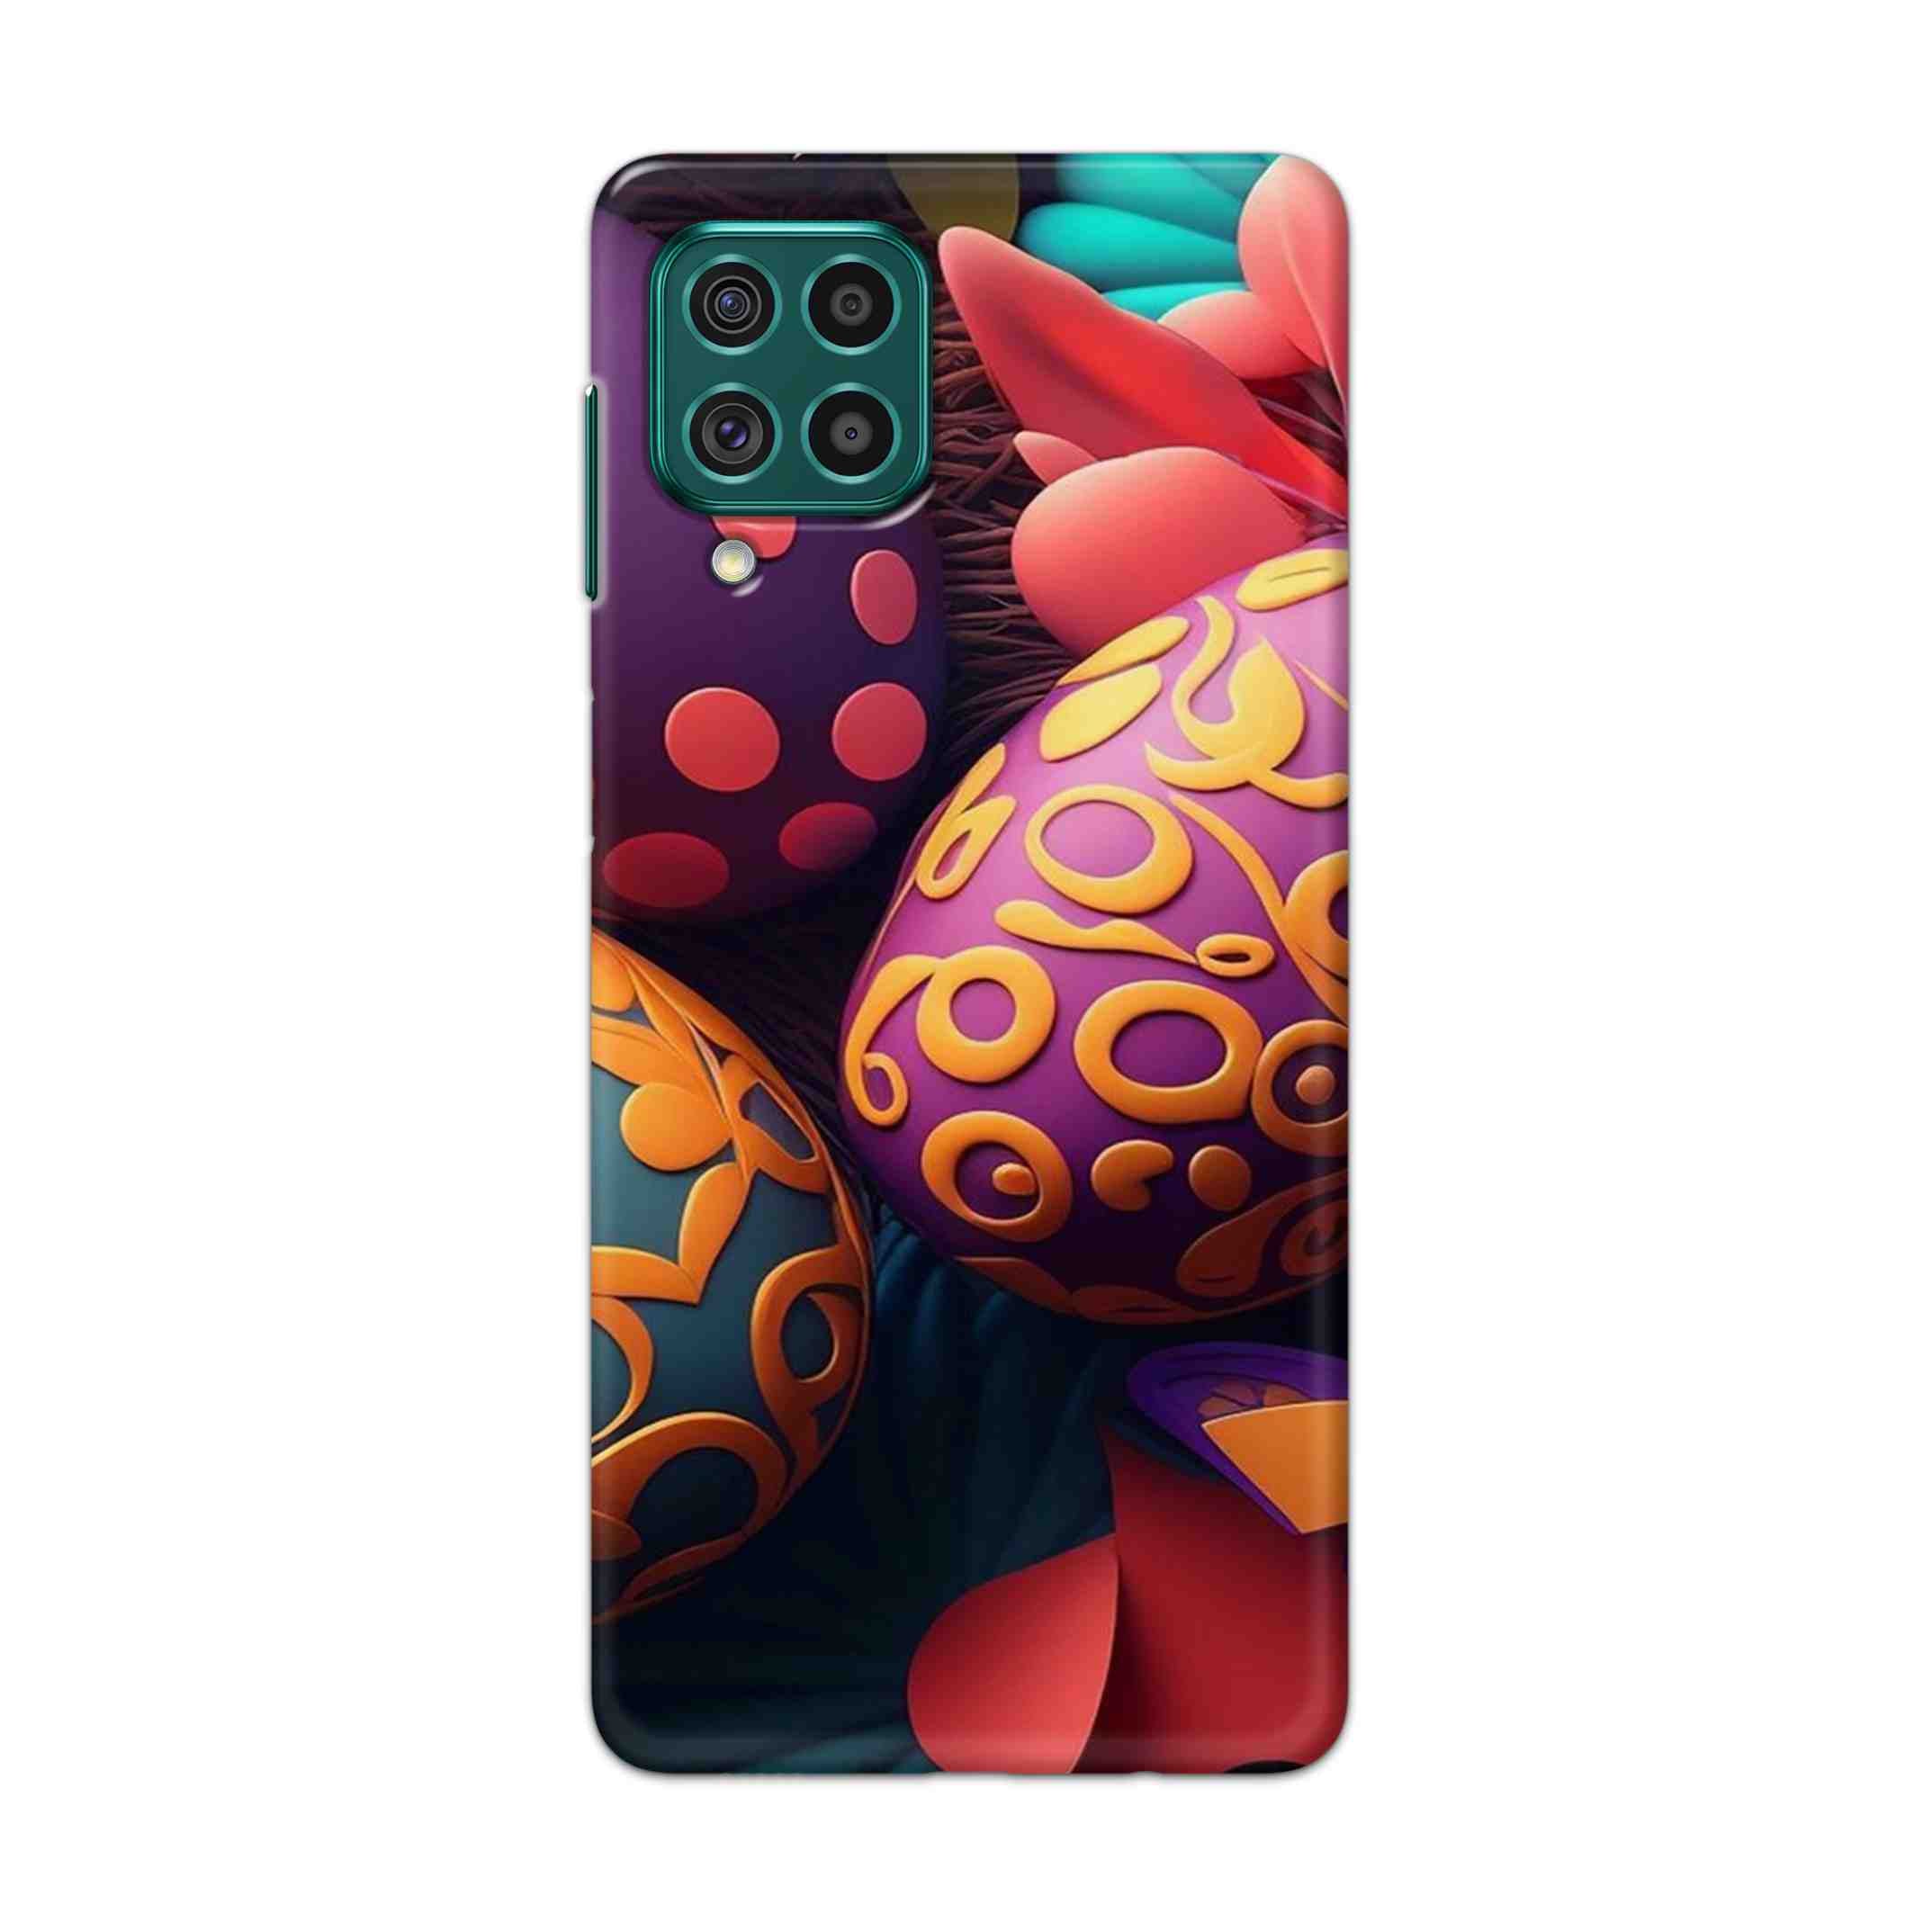 Buy Easter Egg Hard Back Mobile Phone Case Cover For Galaxy F62 Online